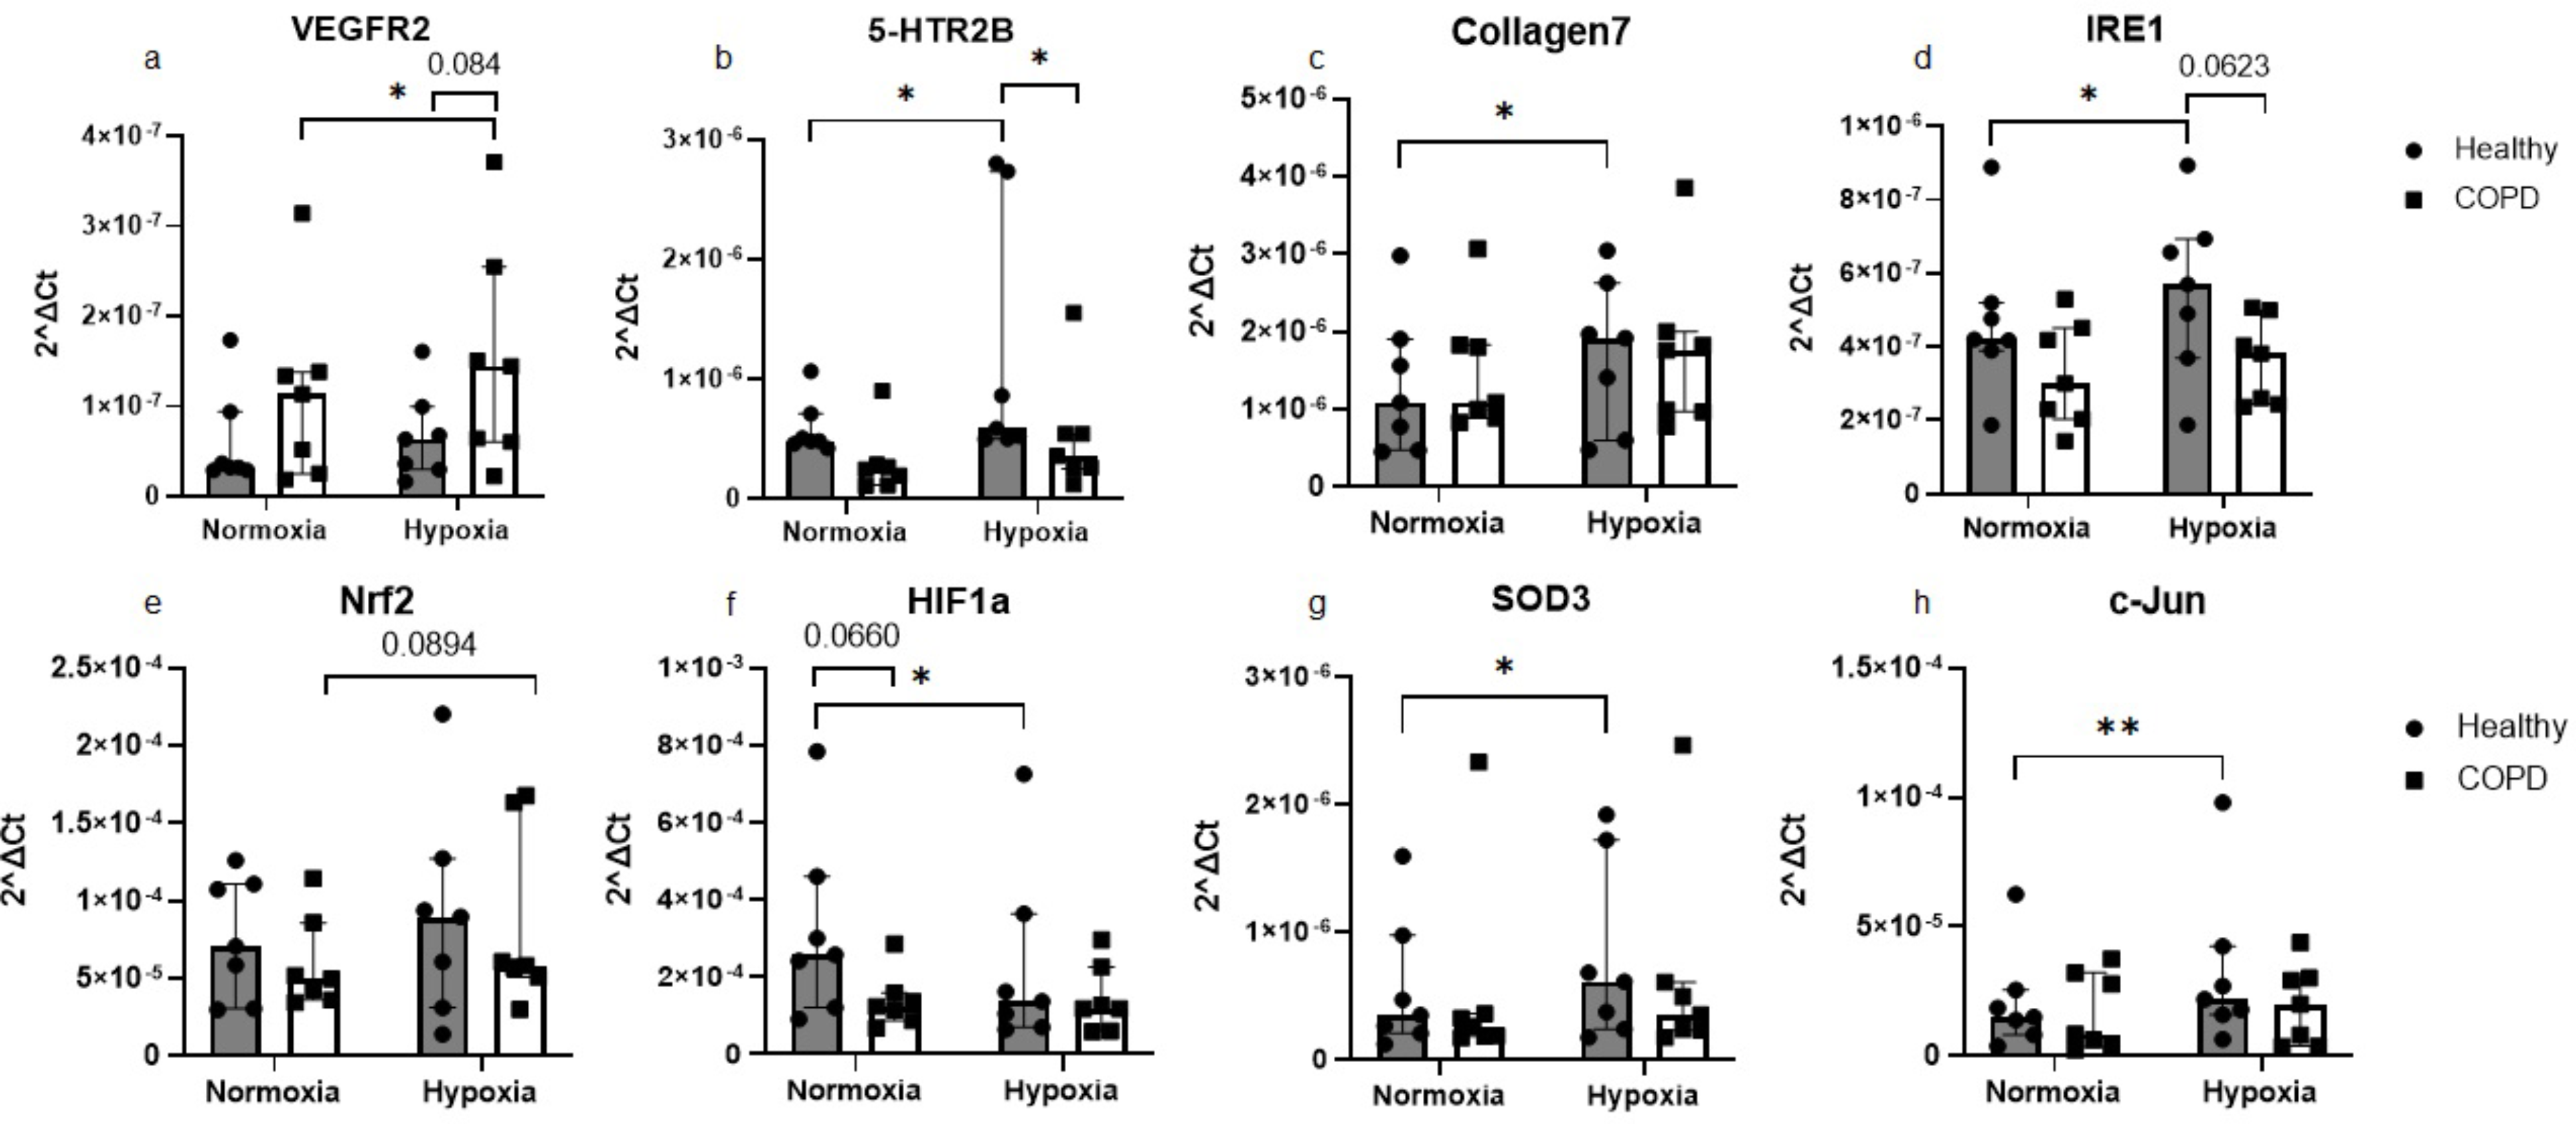 Altered hypoxia-induced cellular responses and inflammatory profile in lung fibroblasts from COPD patients compared to control subjects